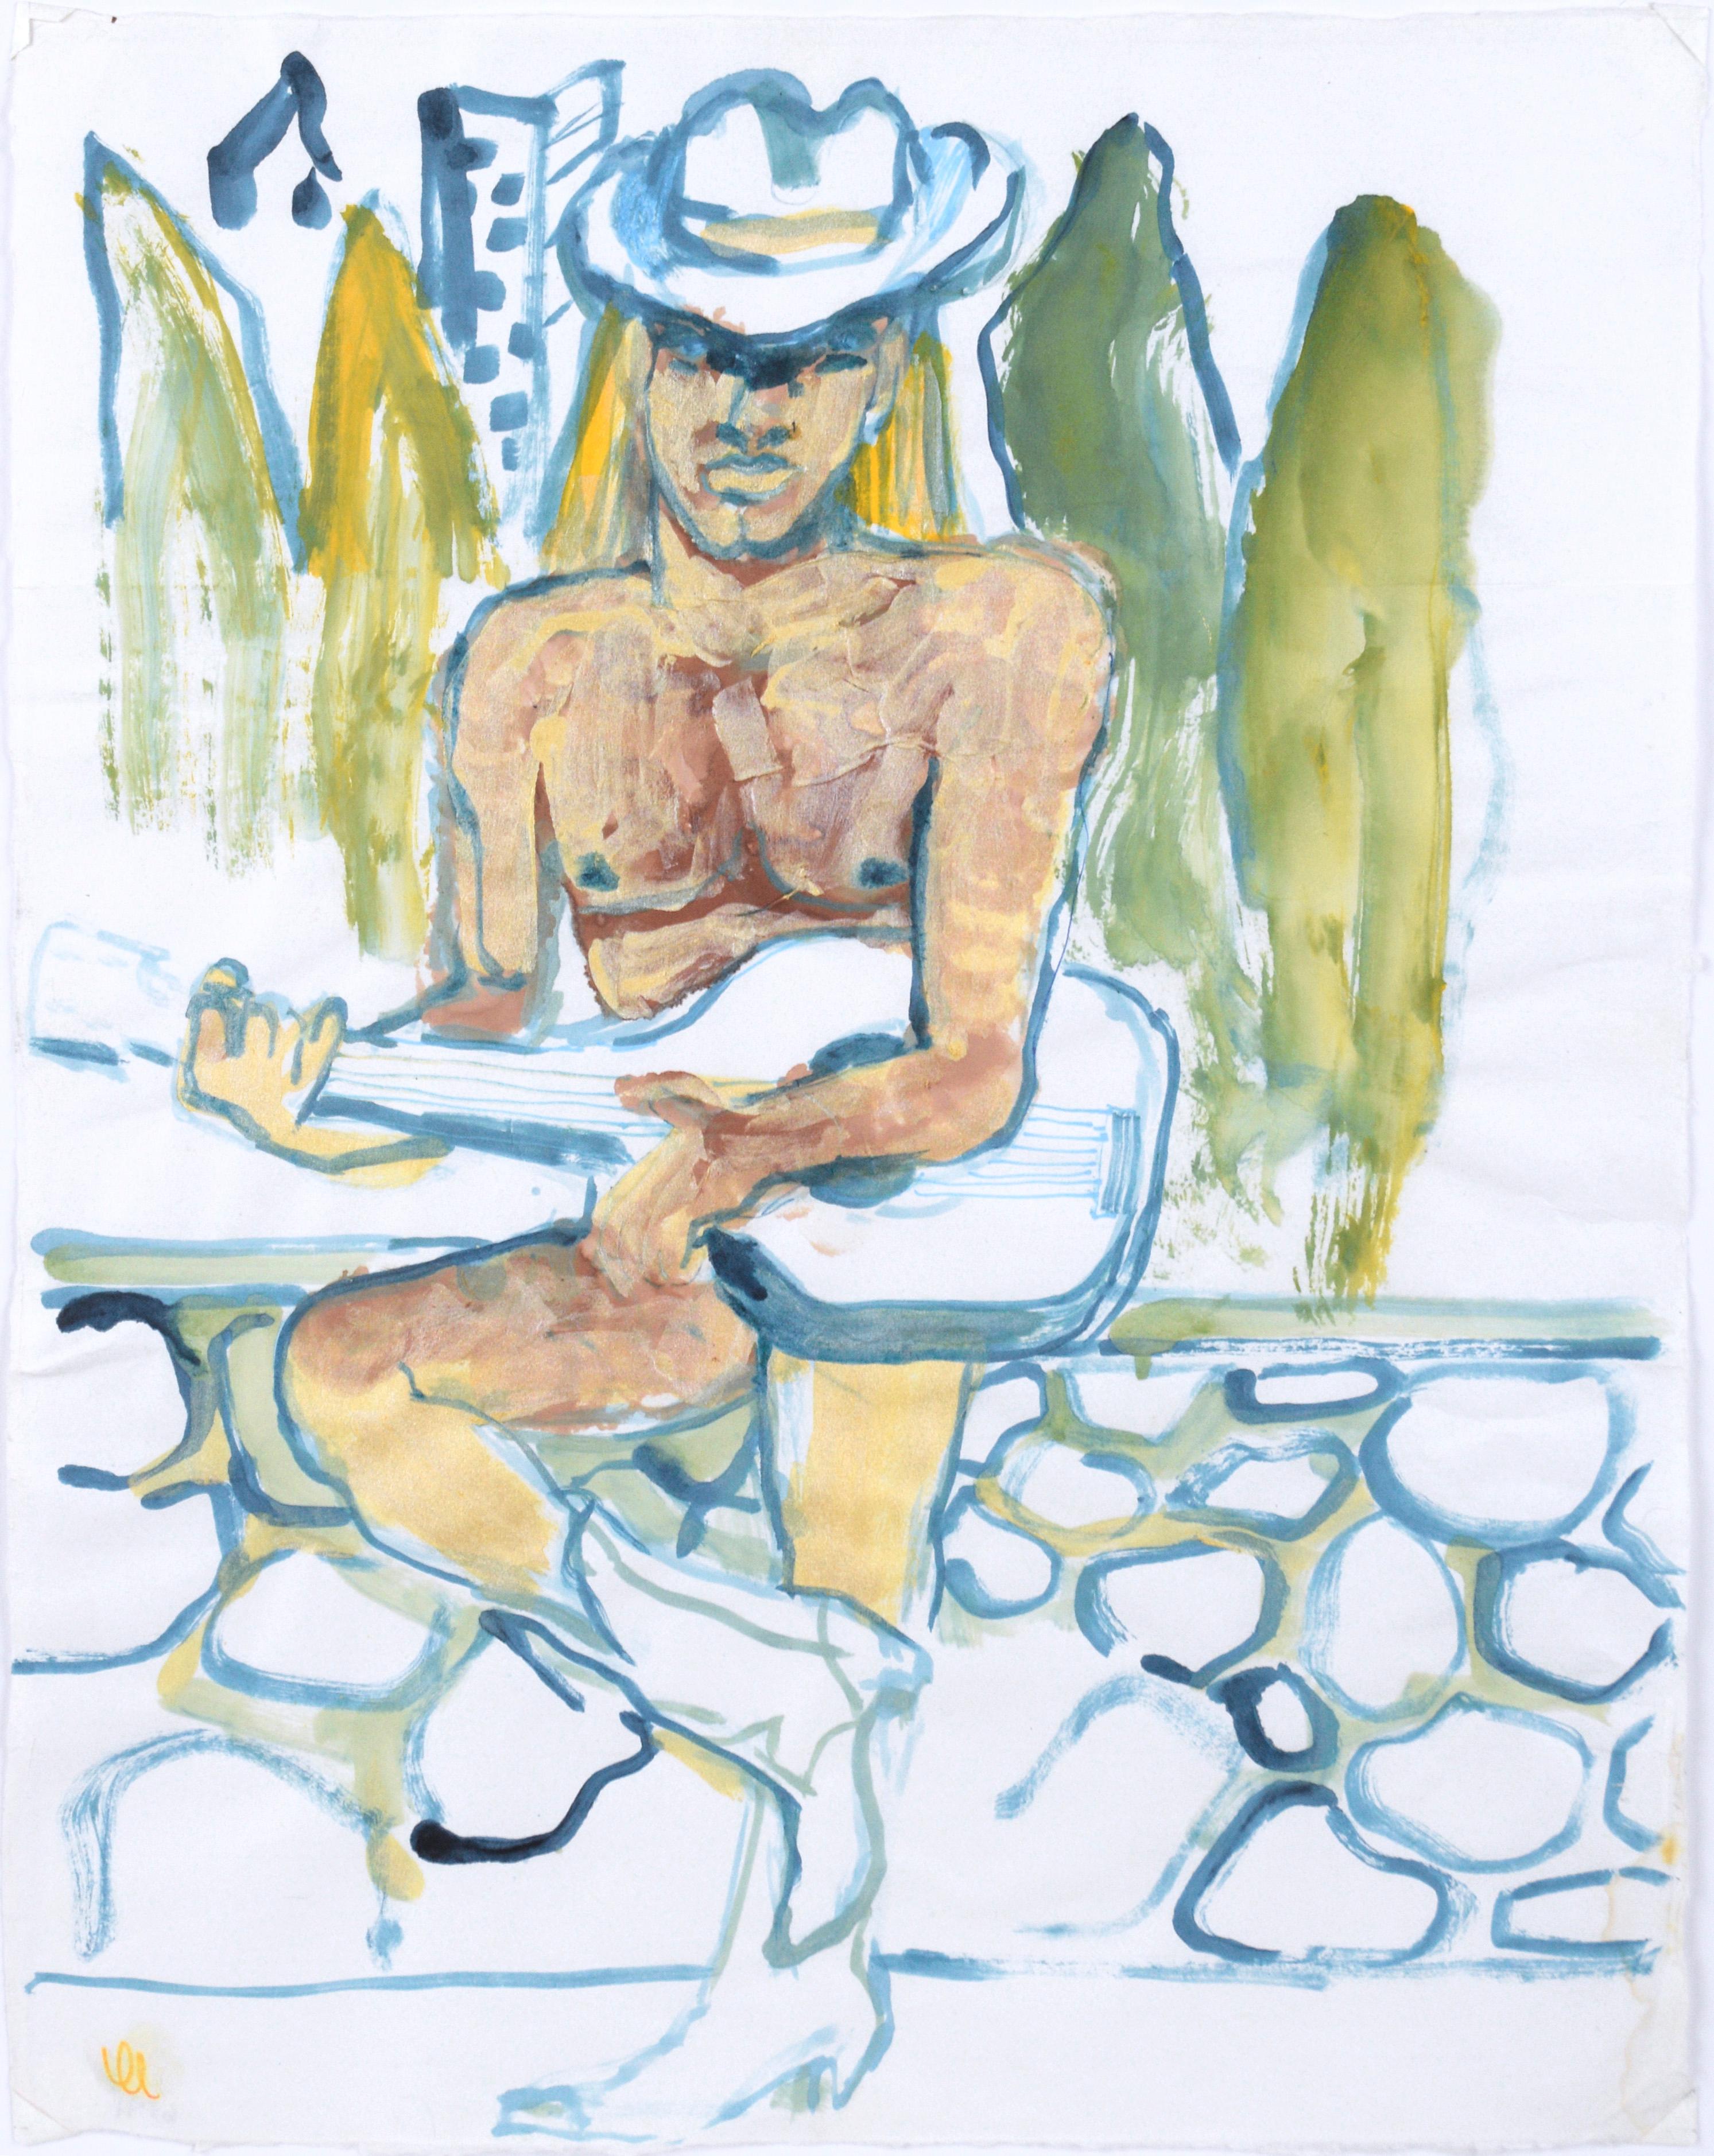 Nude Cowboy and His Guitar - Figurative Abstract on Paper - Painting by Marc Foster Grant